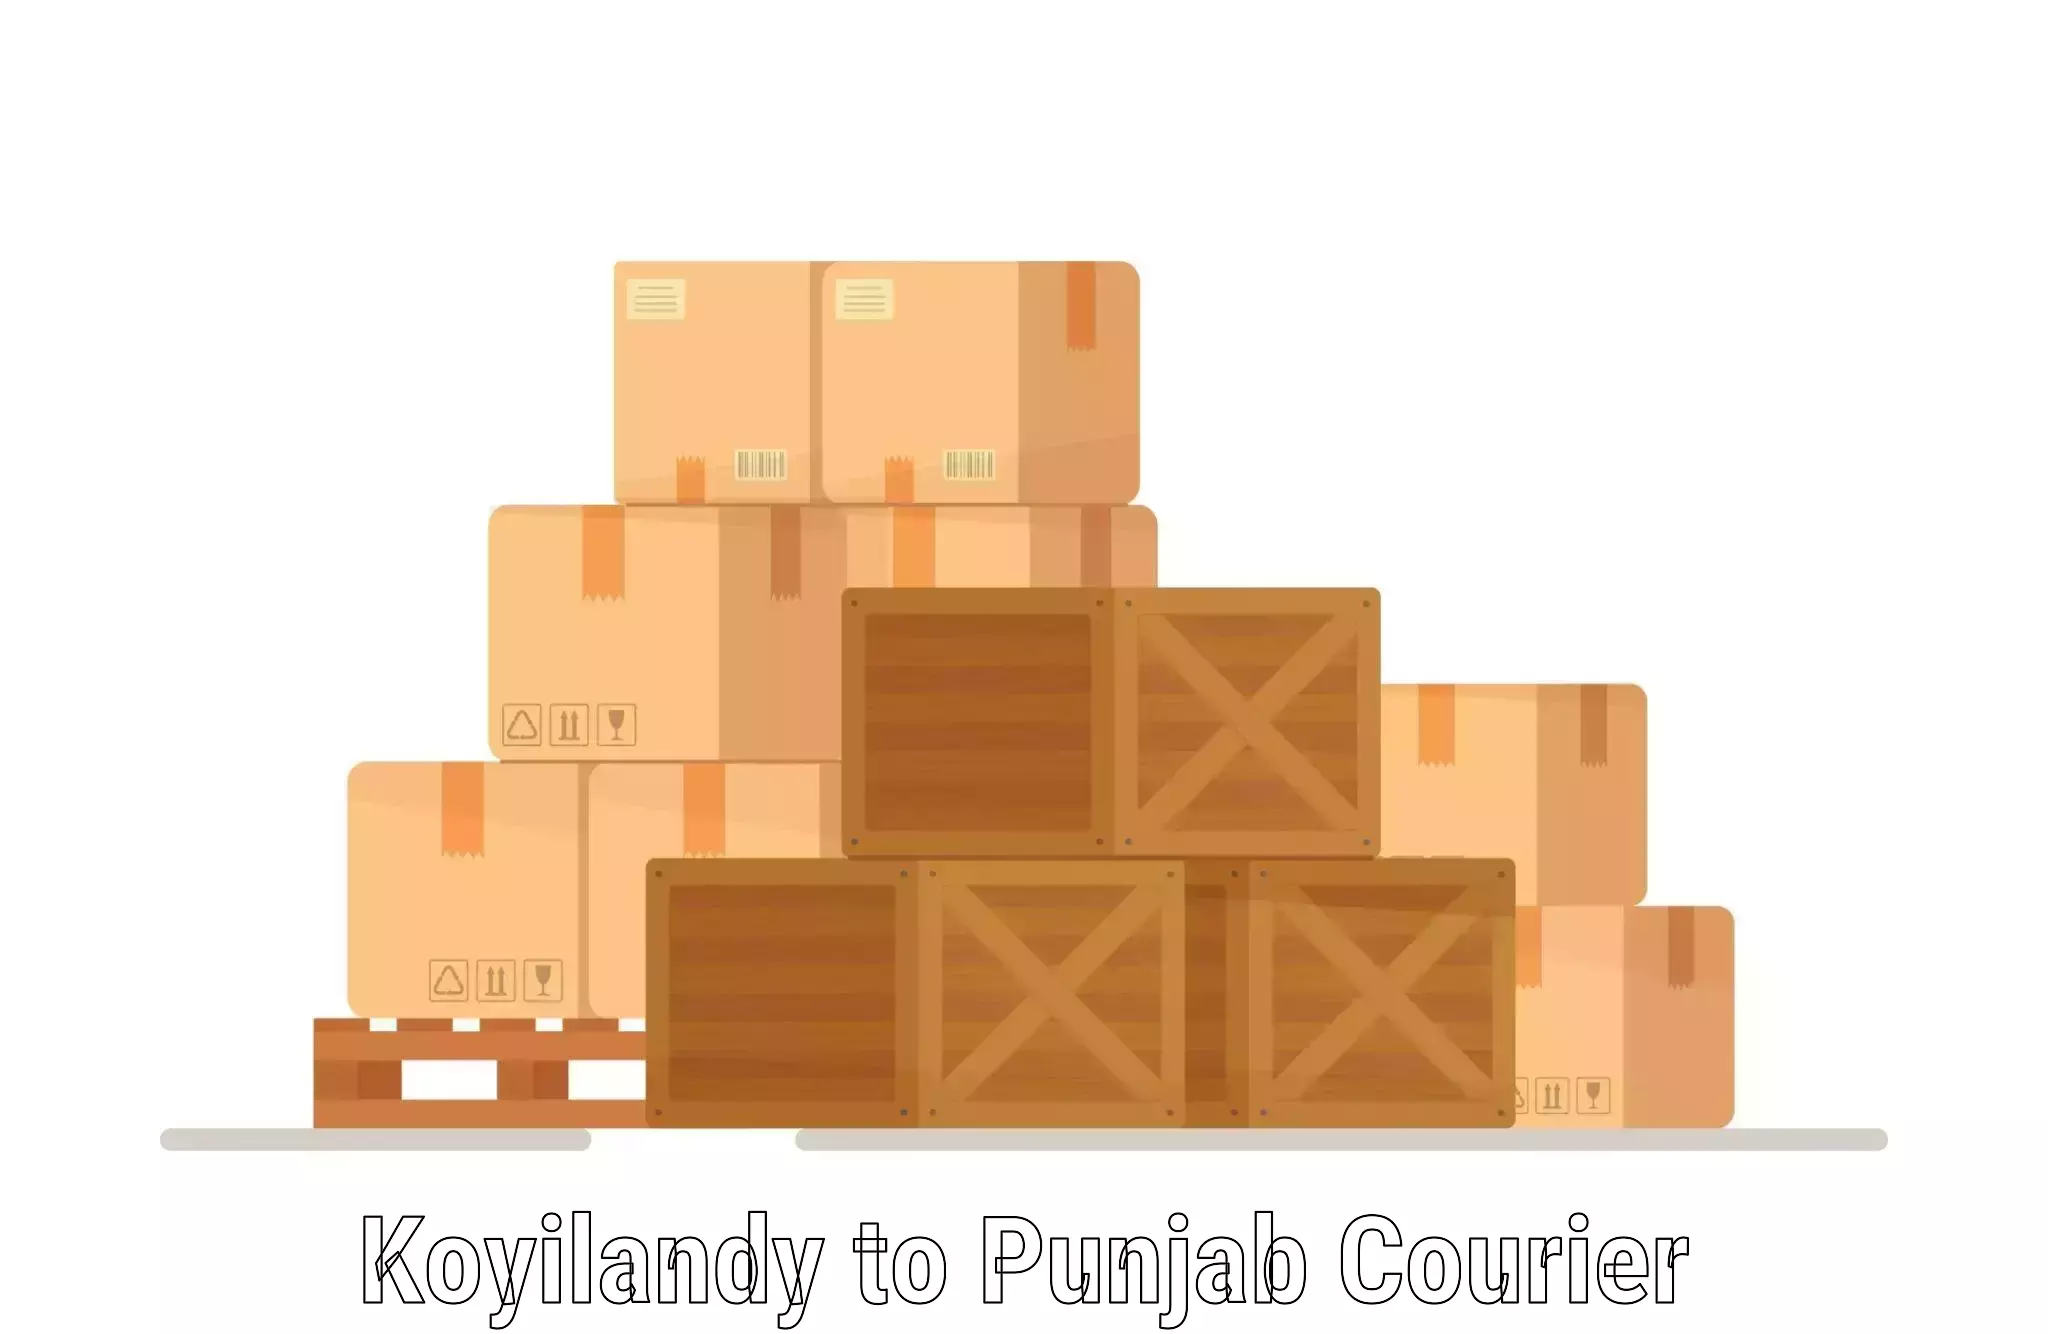 Parcel handling and care Koyilandy to Mohali